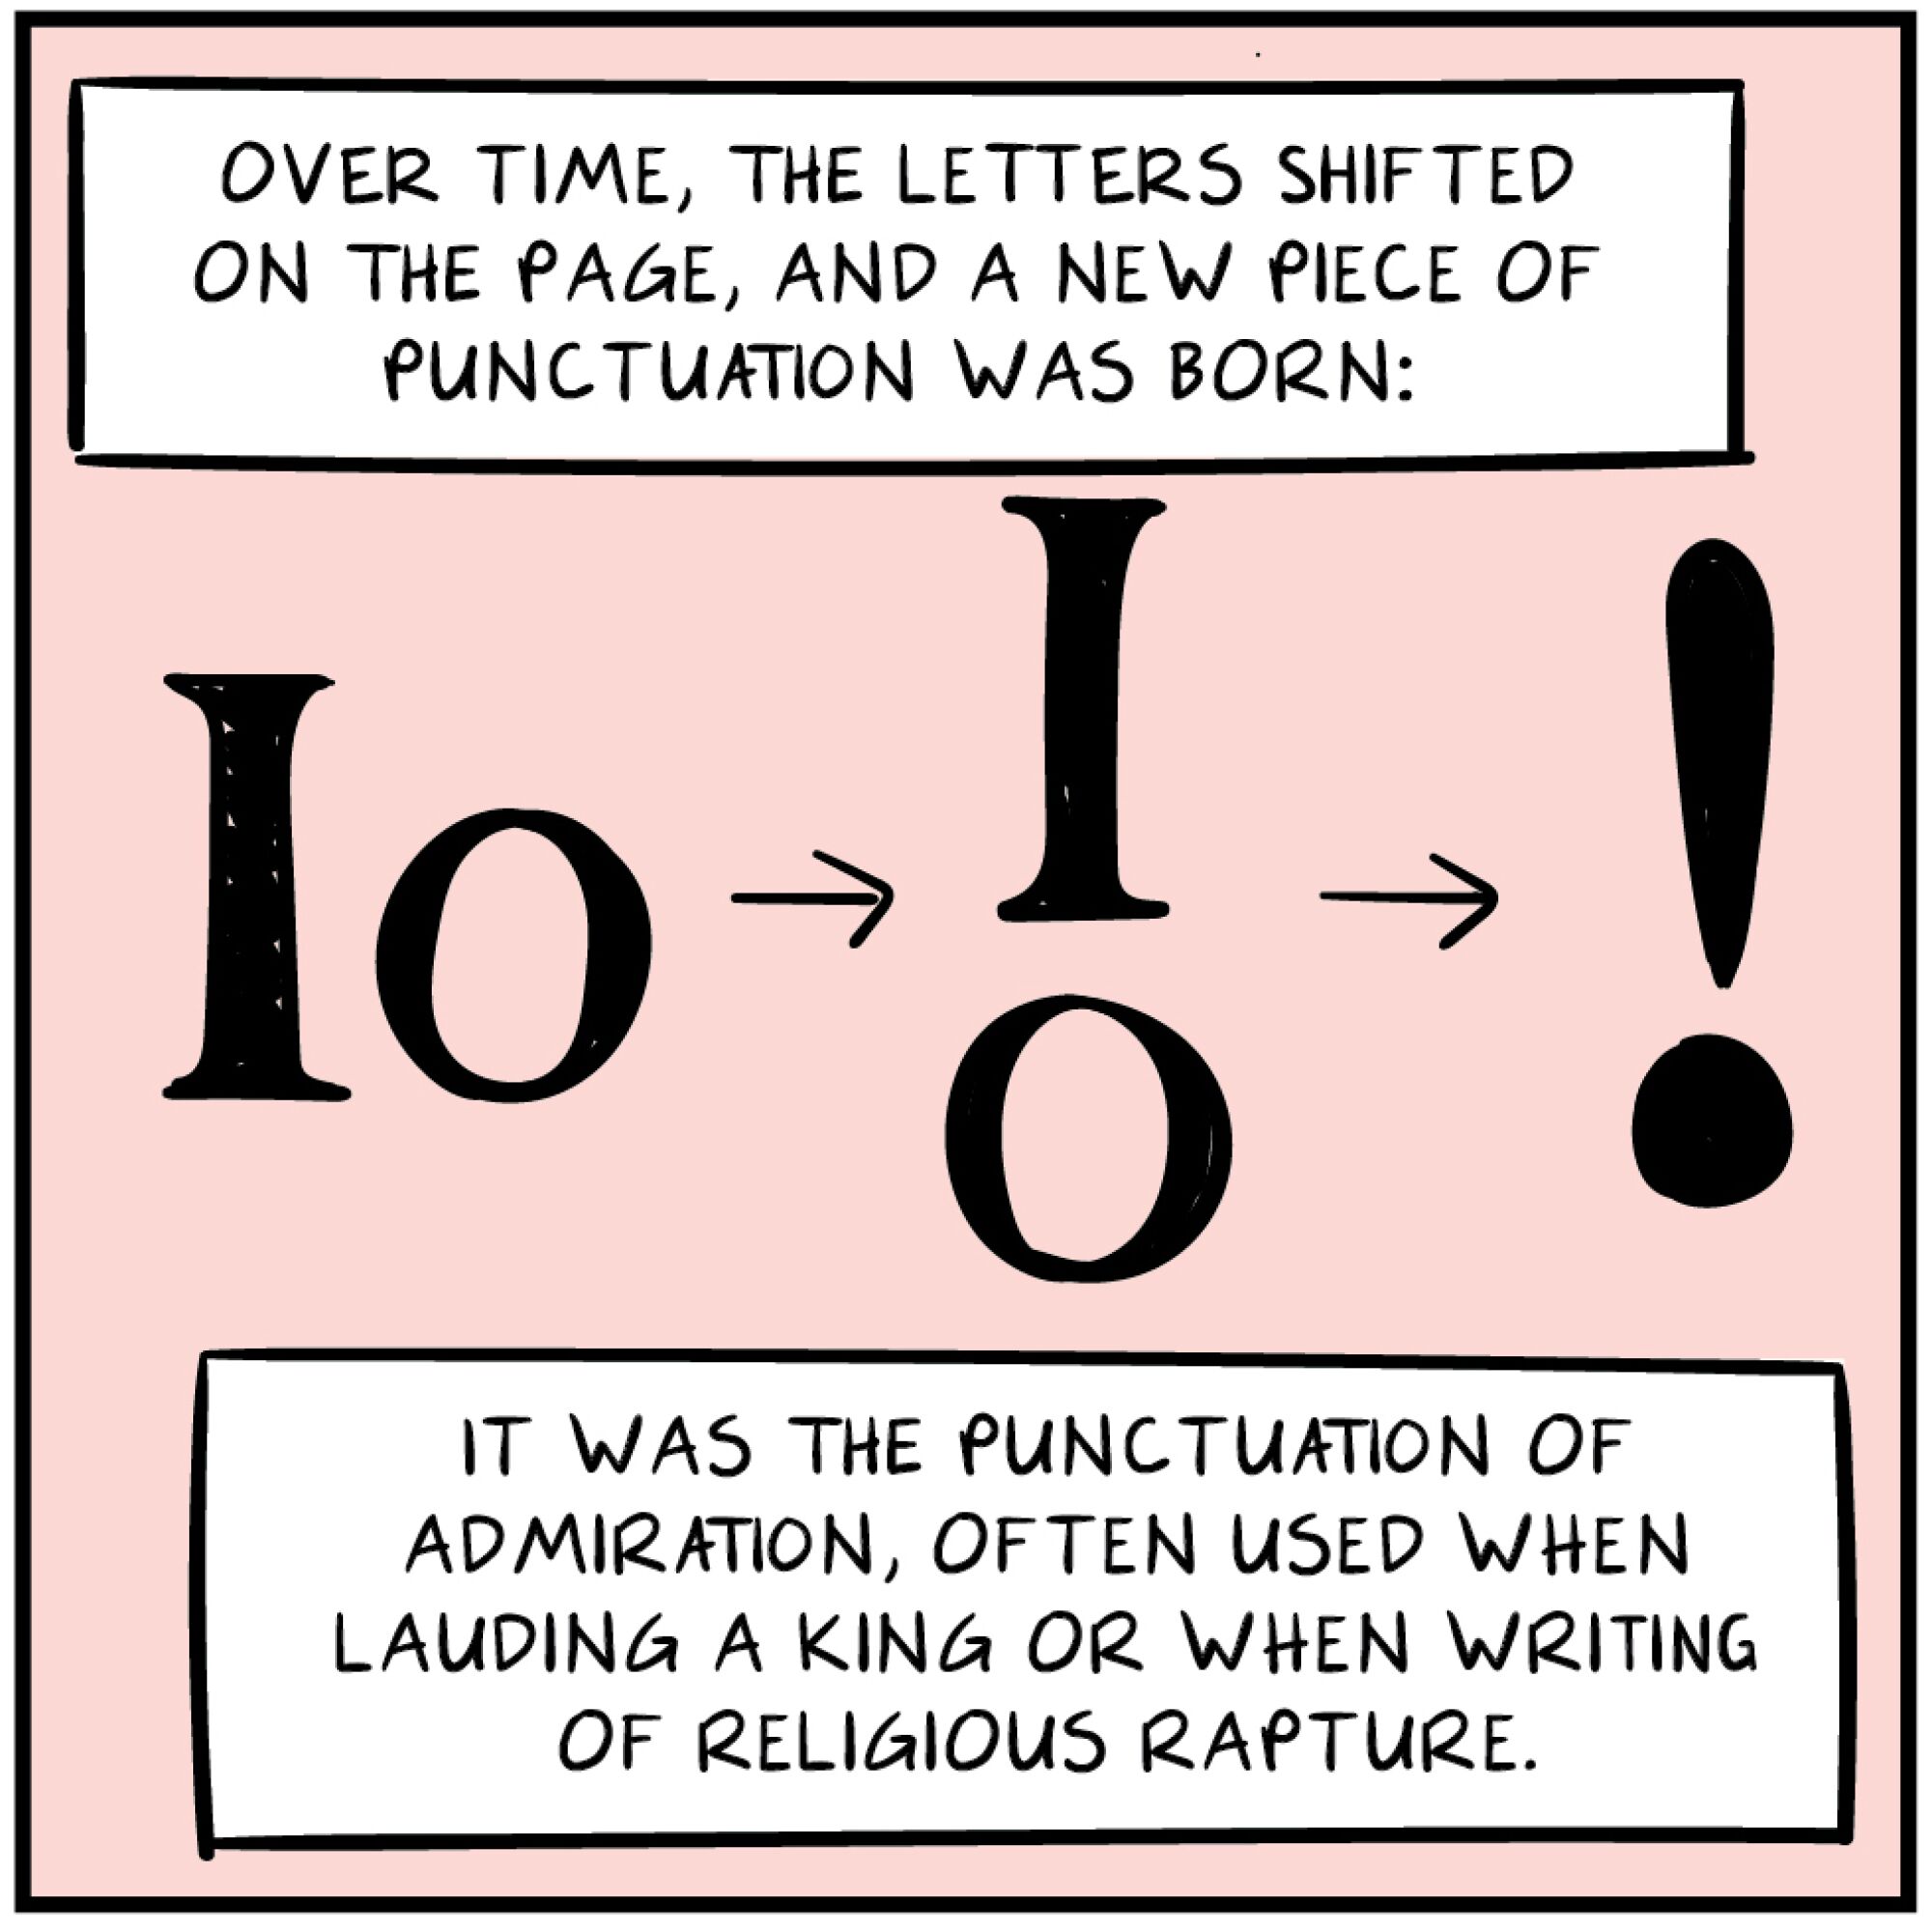 Comic panel showing how the Latin word "io," meaning "joy," morphed into an exclamation point